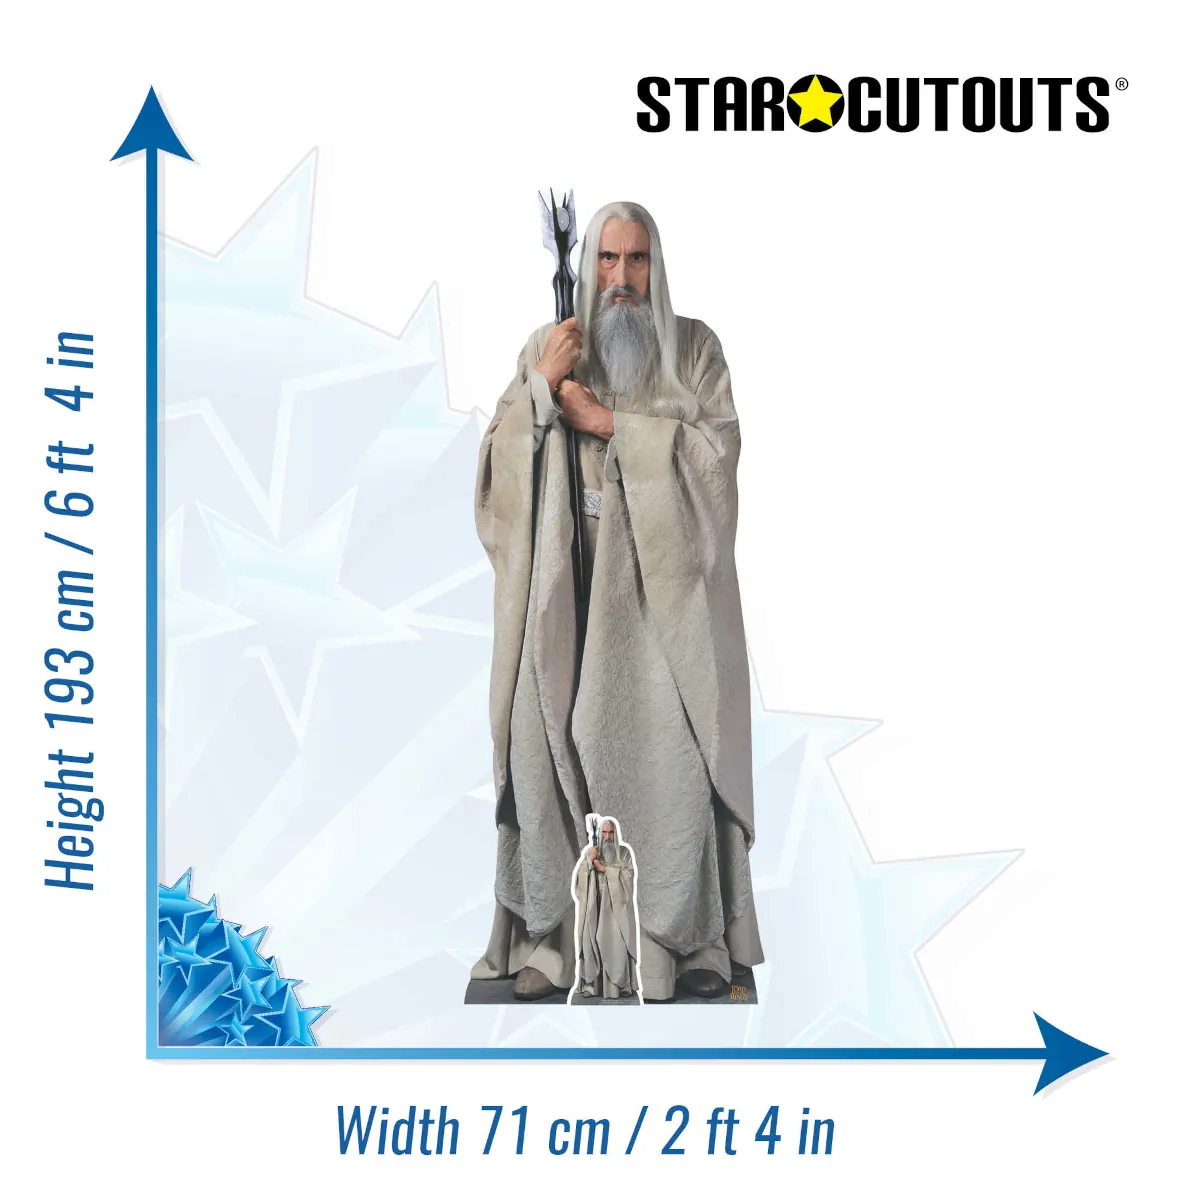 SC4135 Saruman (The Lord of the Rings) Official Lifesize + Mini Cardboard Cutout Standee Size